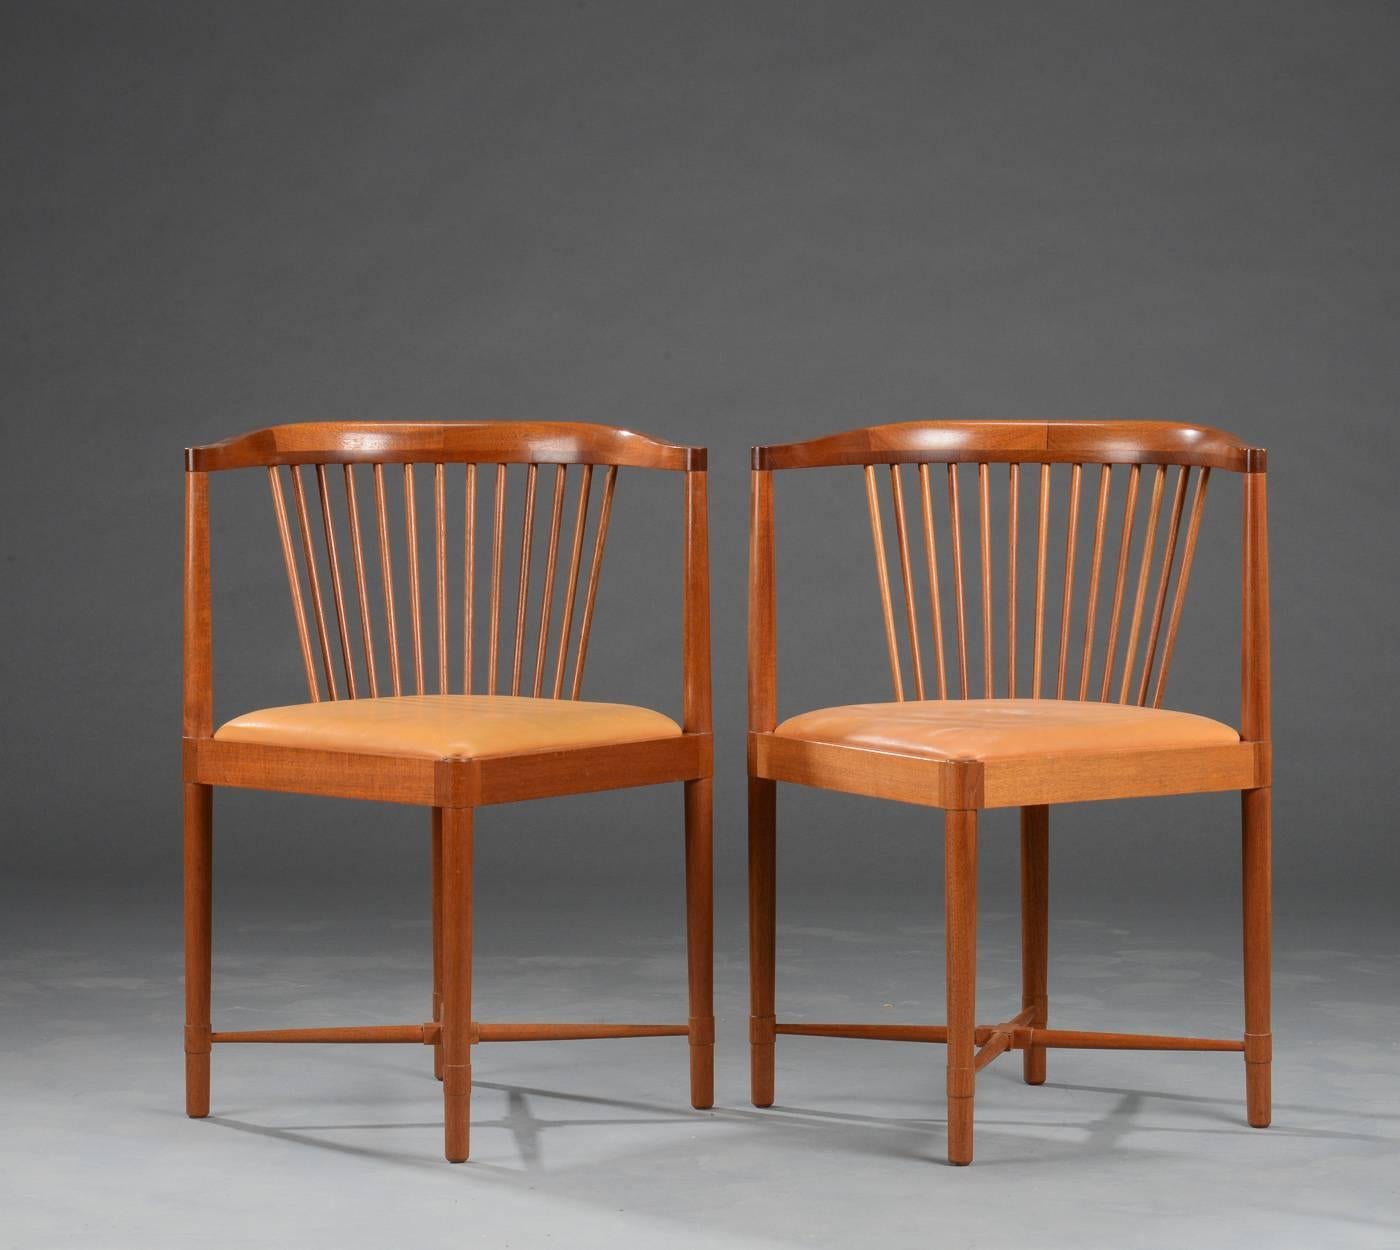 Pair of King of diamonds chairs in mahogany and beige leather designed by Børge Mogensen for Søborg Møbelfabrik in 1944.

The chairs have an elegant design and are very light and well crafted by the cabinetmakers with lots of details that catches